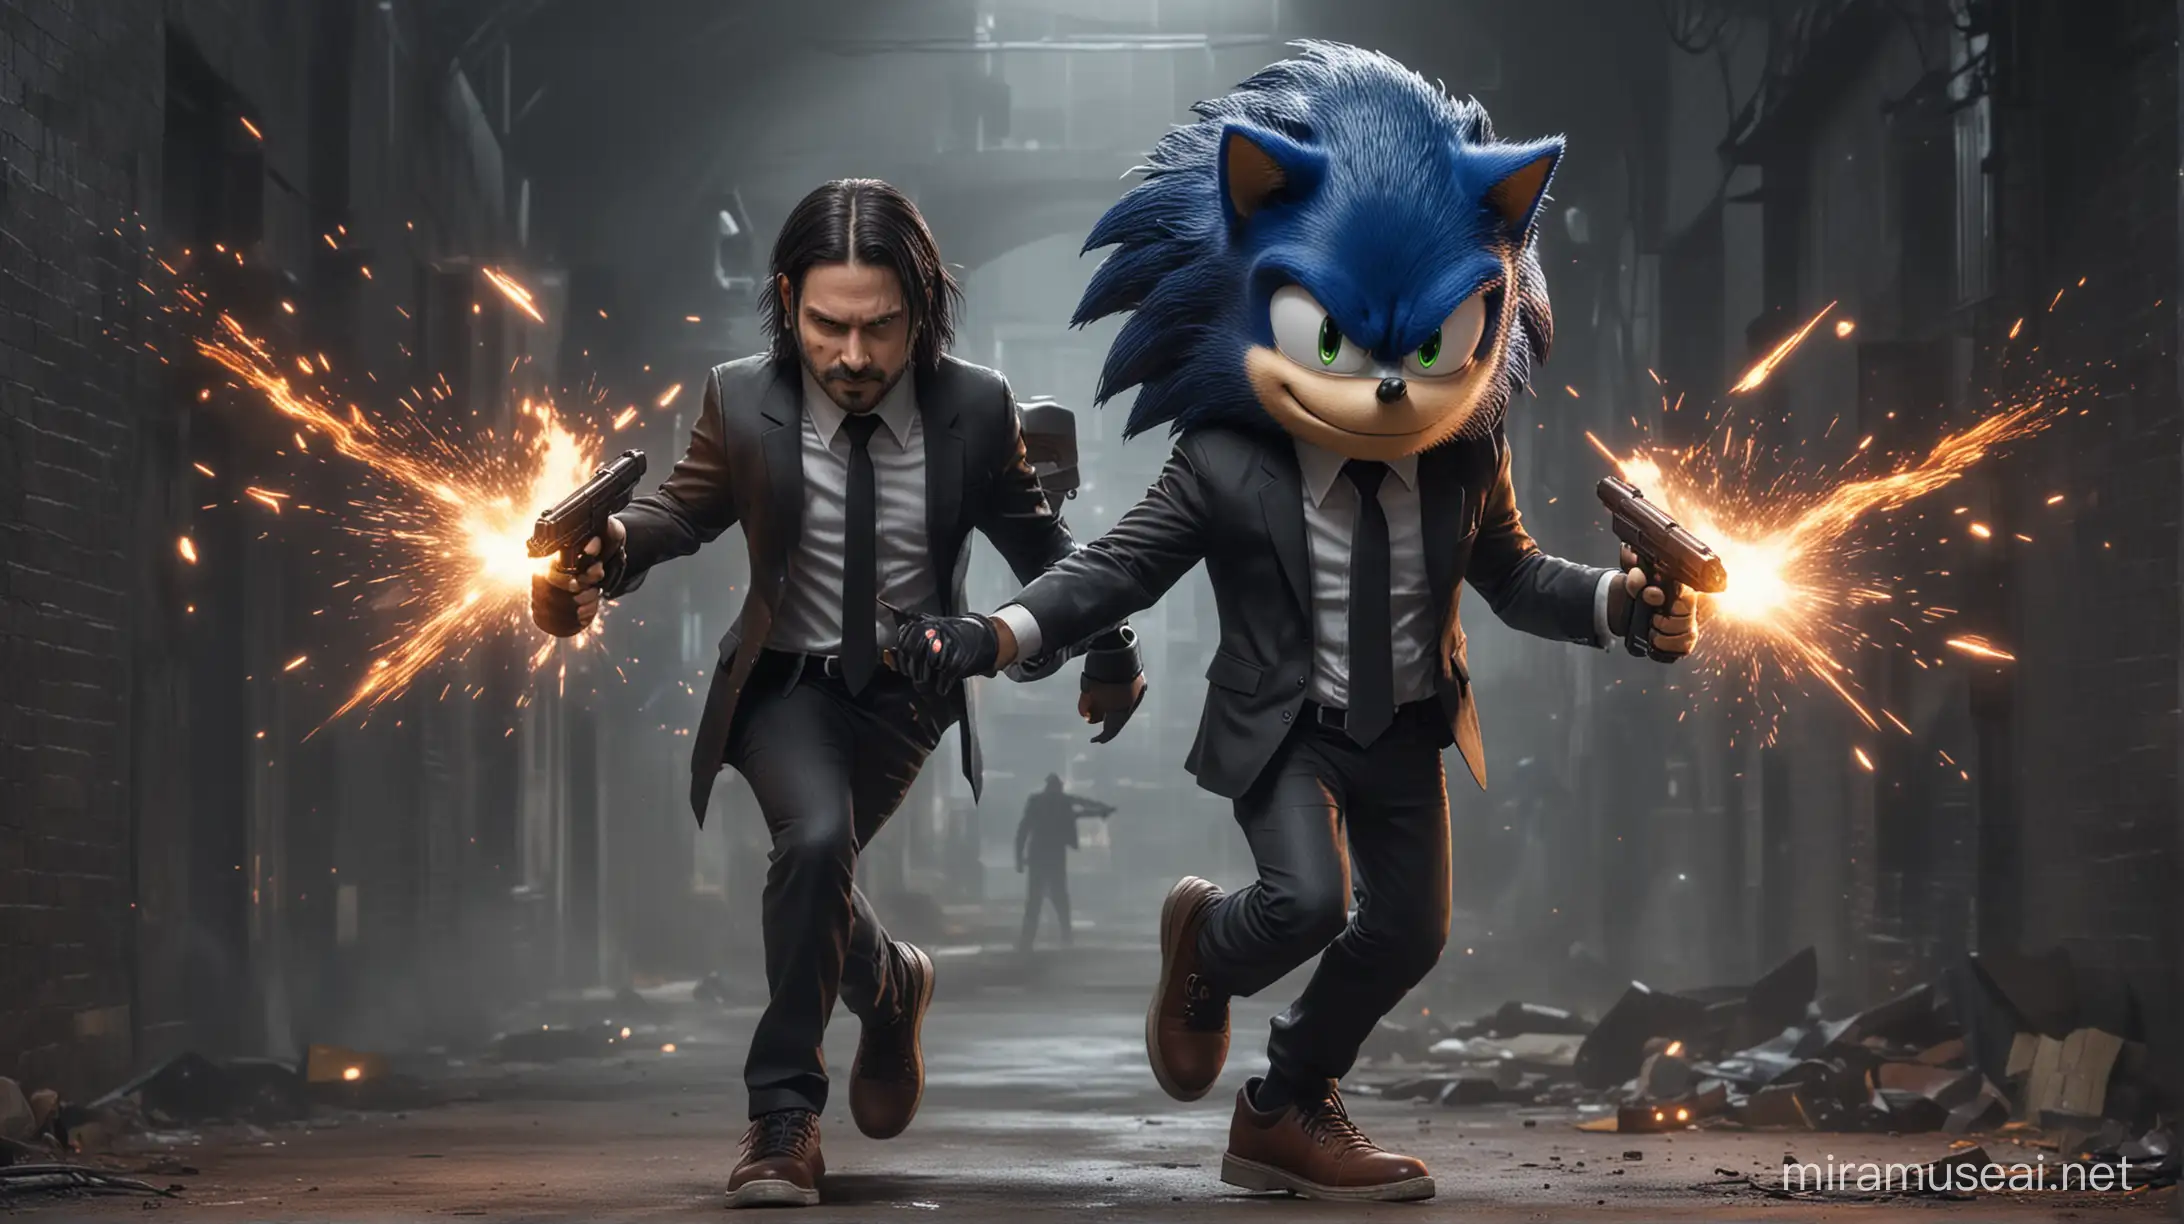 Sonic the Hedgehog Transforming into John Wick Dynamic Fusion of Gaming Icon and Action Hero